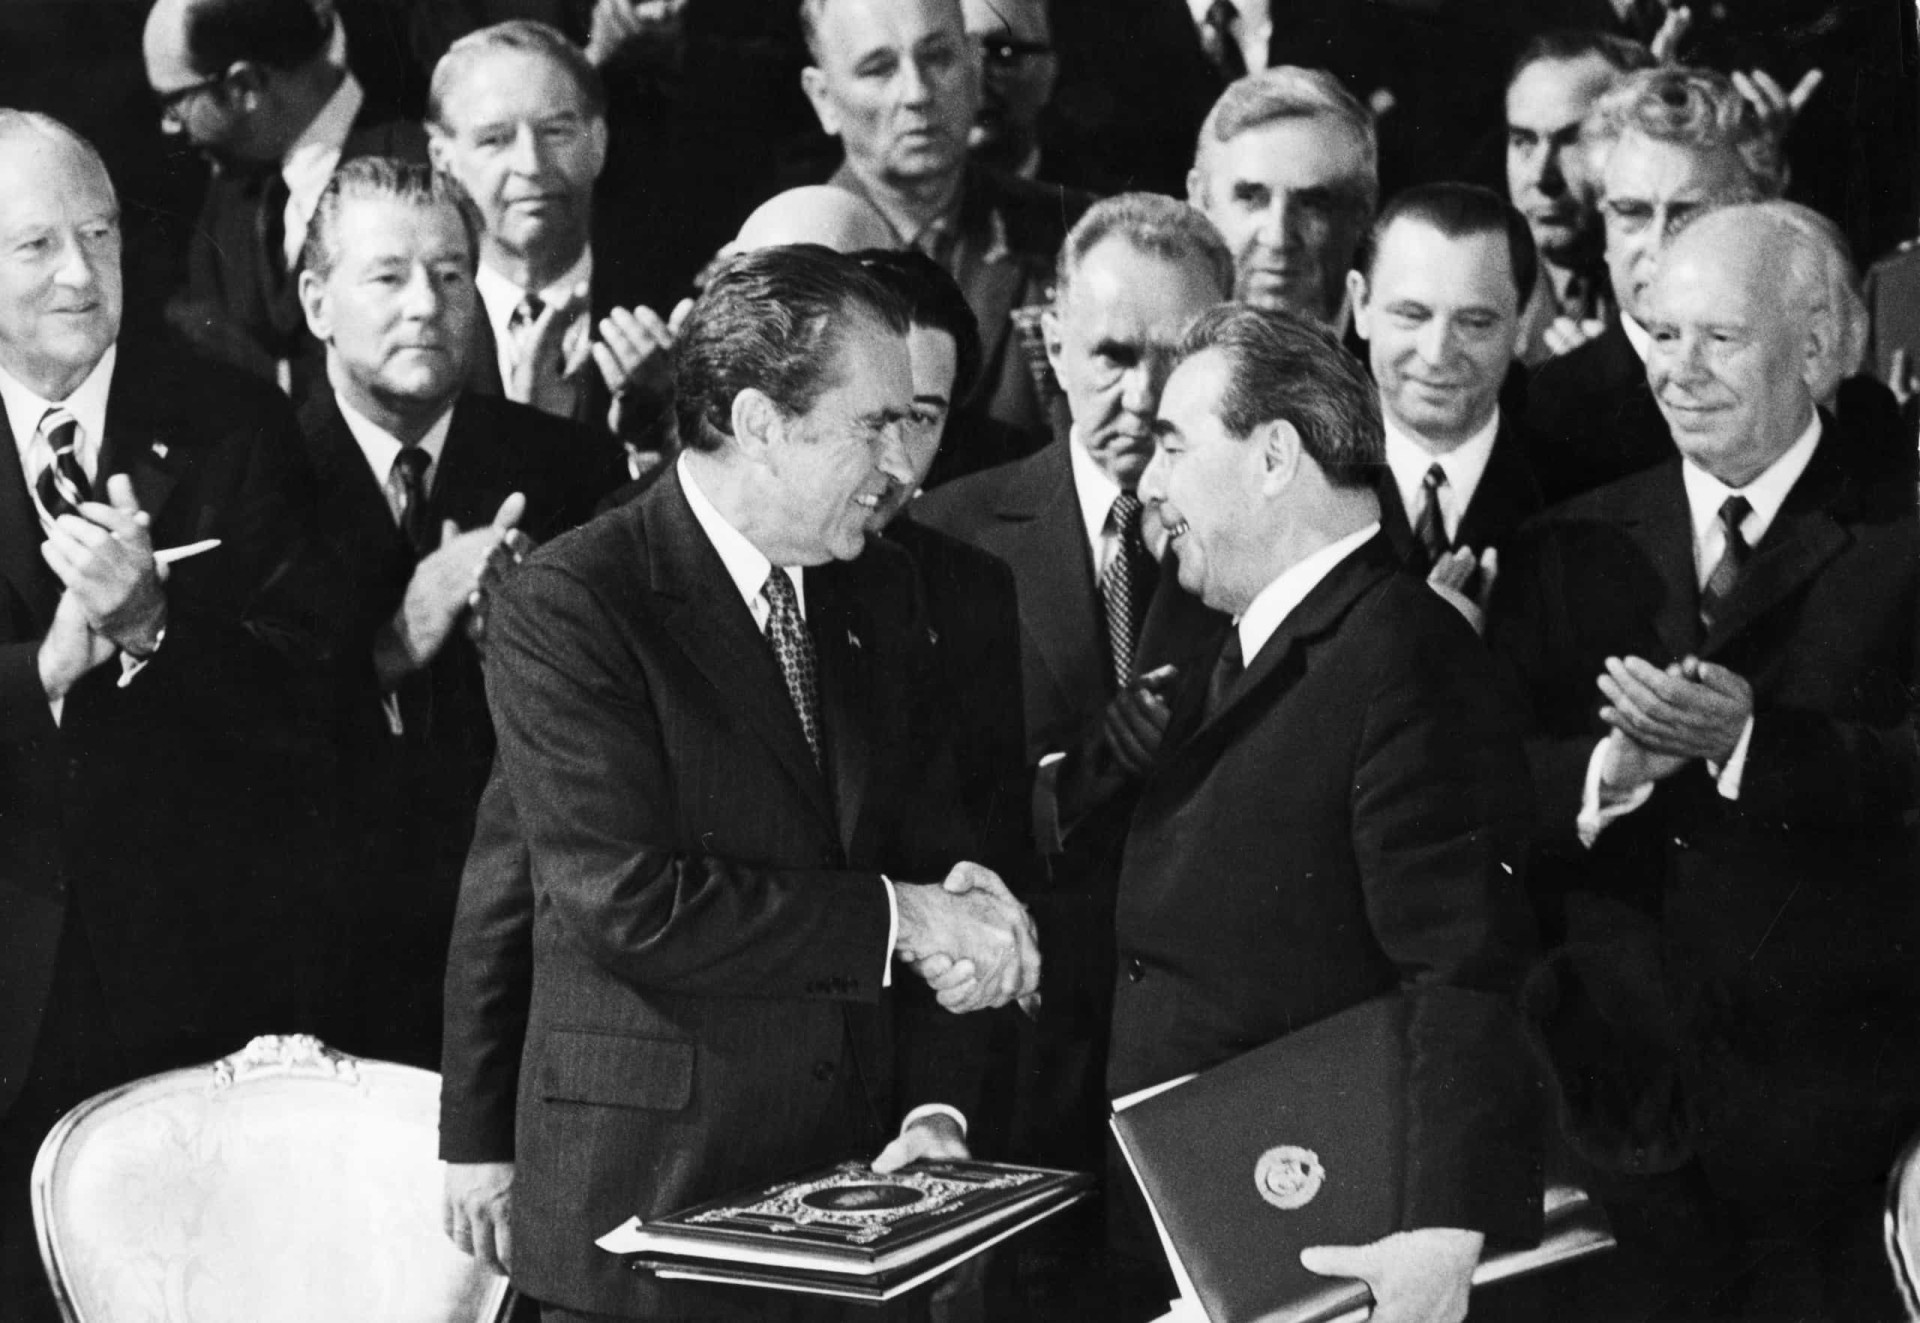 <p>A wave of renewed optimism sweeps the world as the United States and the Soviet Union sign the first Strategic Arms Limitation Treaty (SALT I) and the Anti-Ballistic Missile (ABM) Treaty. The clock drops back 120 seconds to 12 minutes before midnight as Richard Nixon and Leonid Brezhnev close the deal in Moscow.</p><p><a href="https://www.msn.com/en-au/community/channel/vid-7xx8mnucu55yw63we9va2gwr7uihbxwc68fxqp25x6tg4ftibpra?cvid=94631541bc0f4f89bfd59158d696ad7e">Follow us and access great exclusive content every day</a></p>